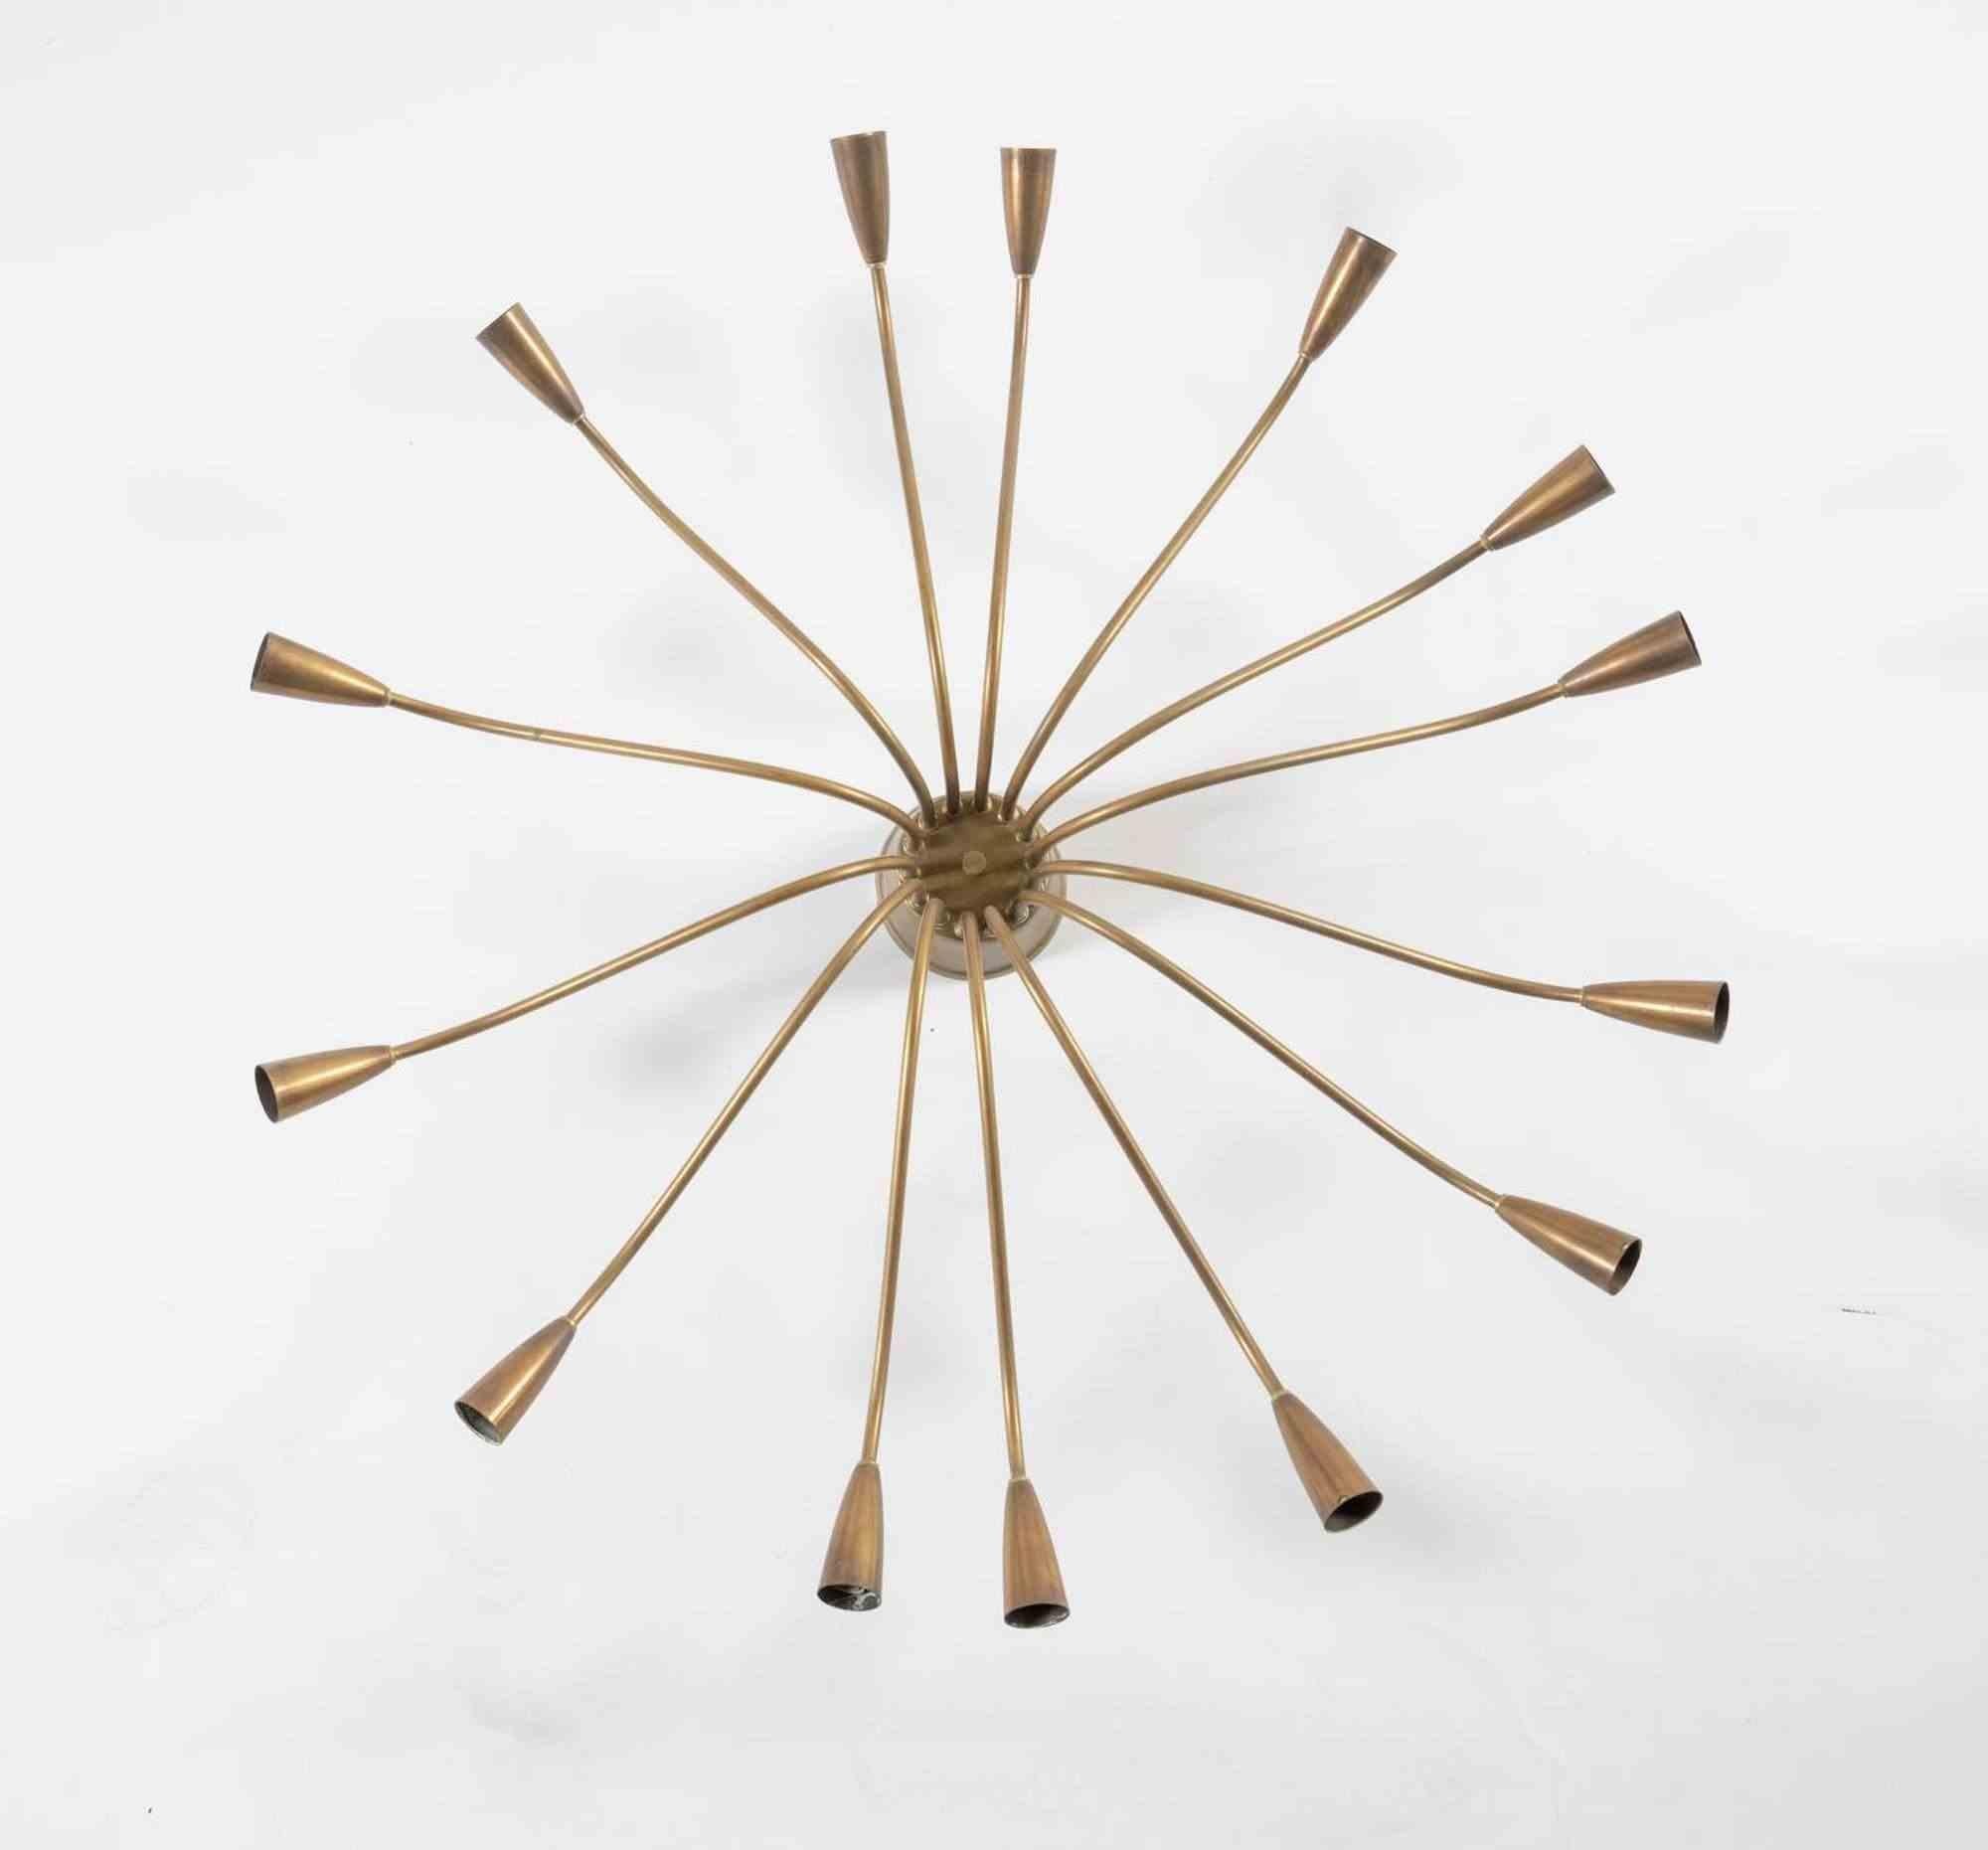 Large brass ceiling lamp, 1950s. 

Italian production.

It has 14 lights arranged in a radial pattern.

Diameter 90 cm 

Good condition, only minor signs of wear.